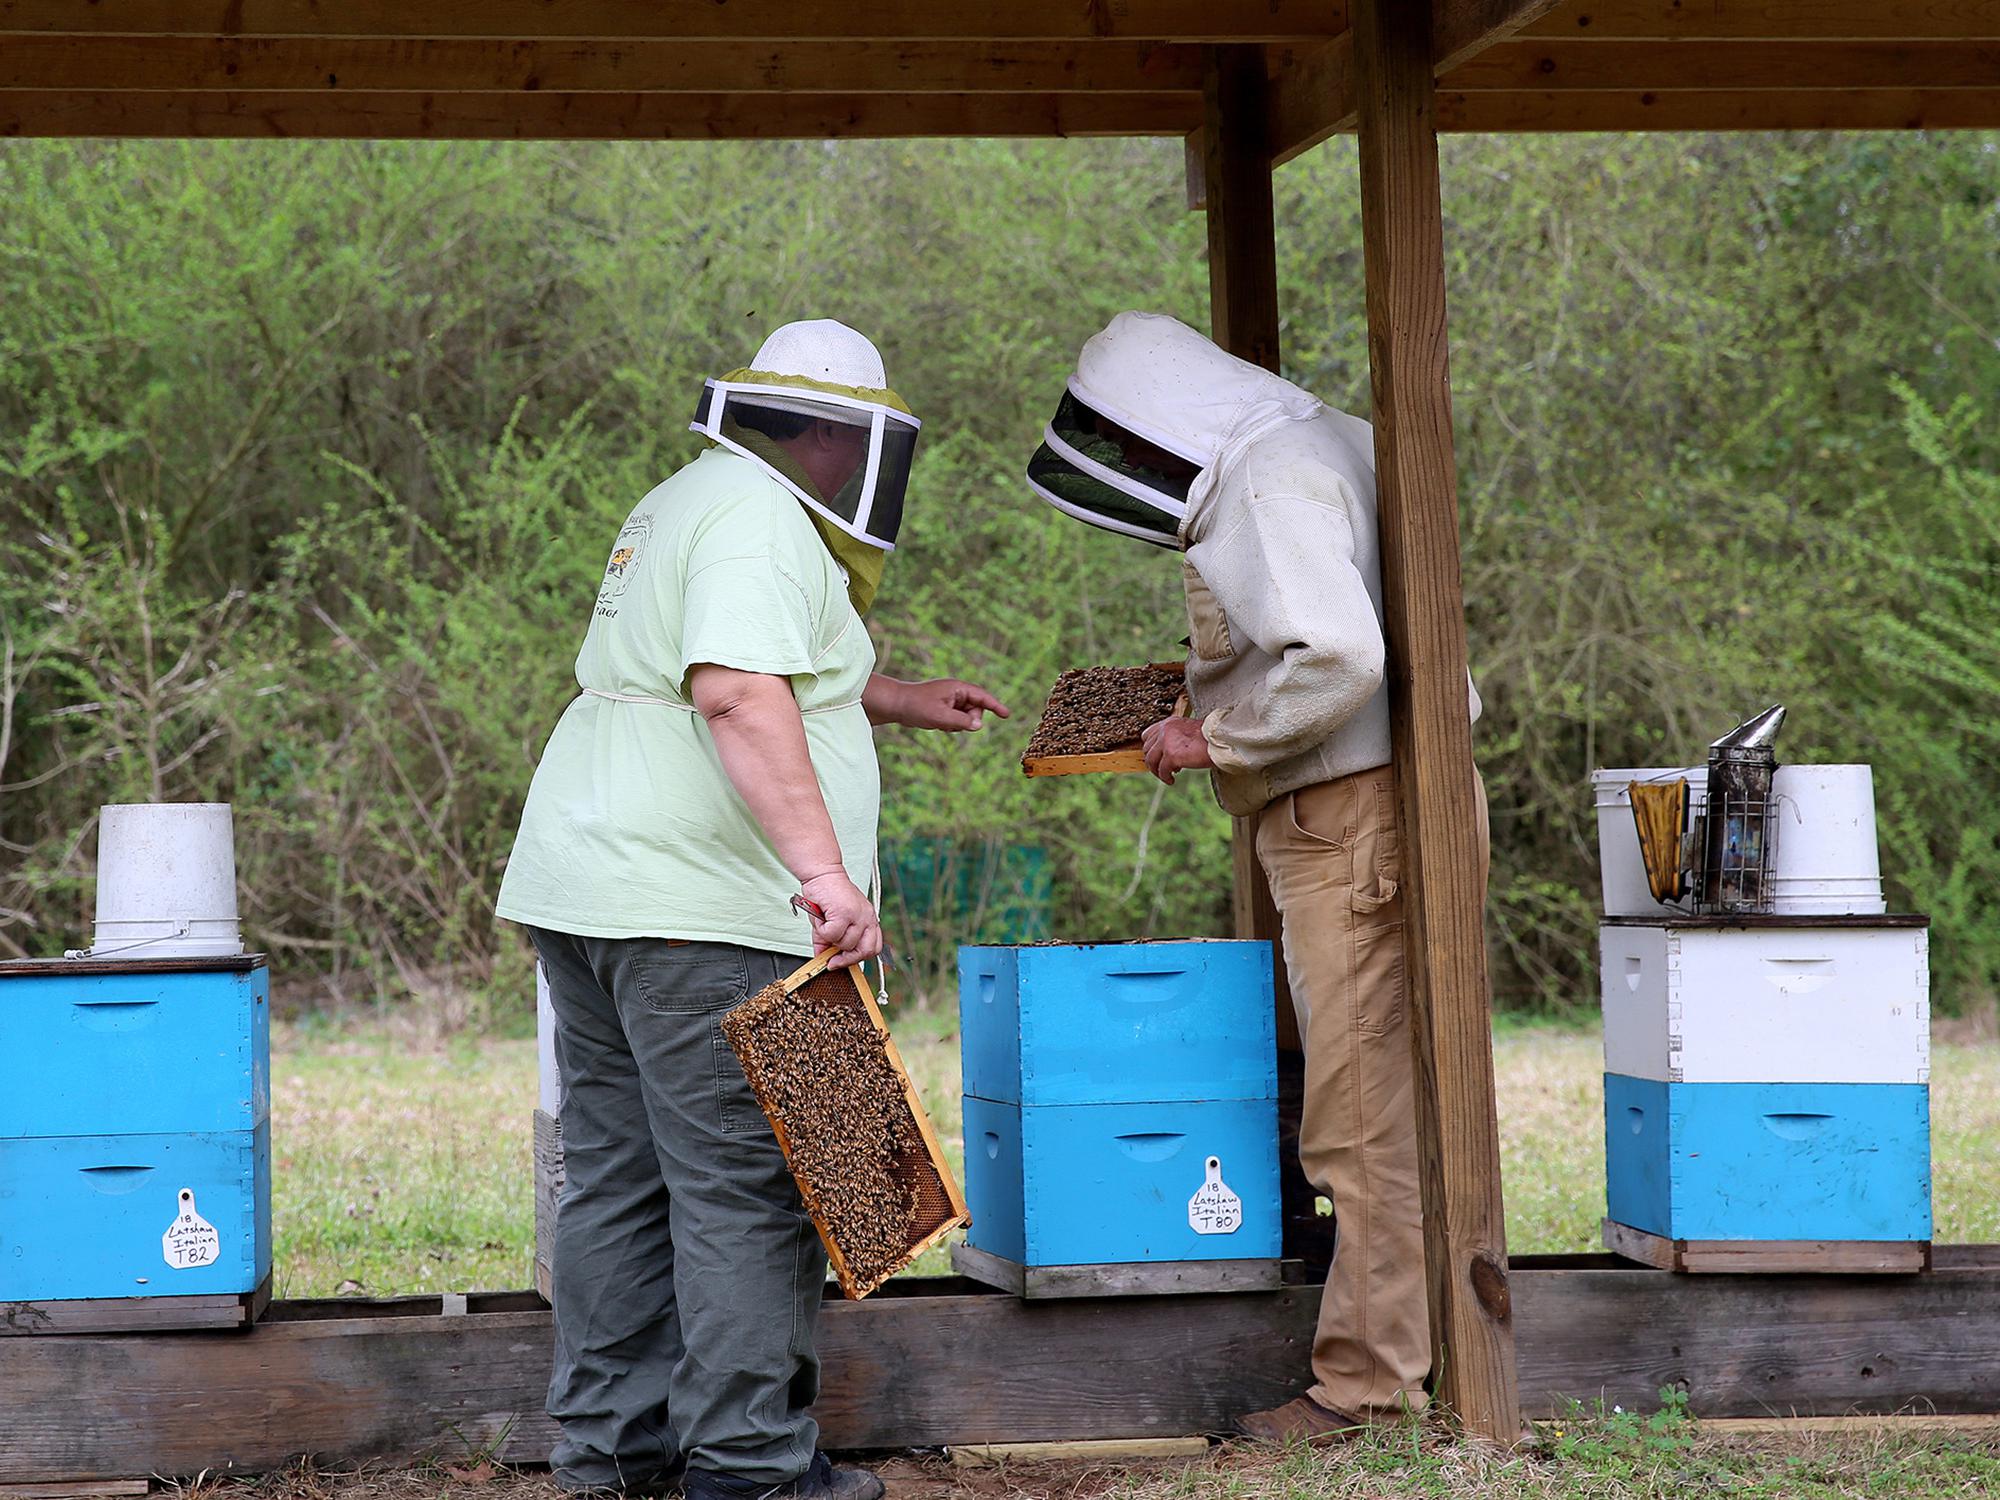 Two men in beekeeping attire examine bee hive boxes.